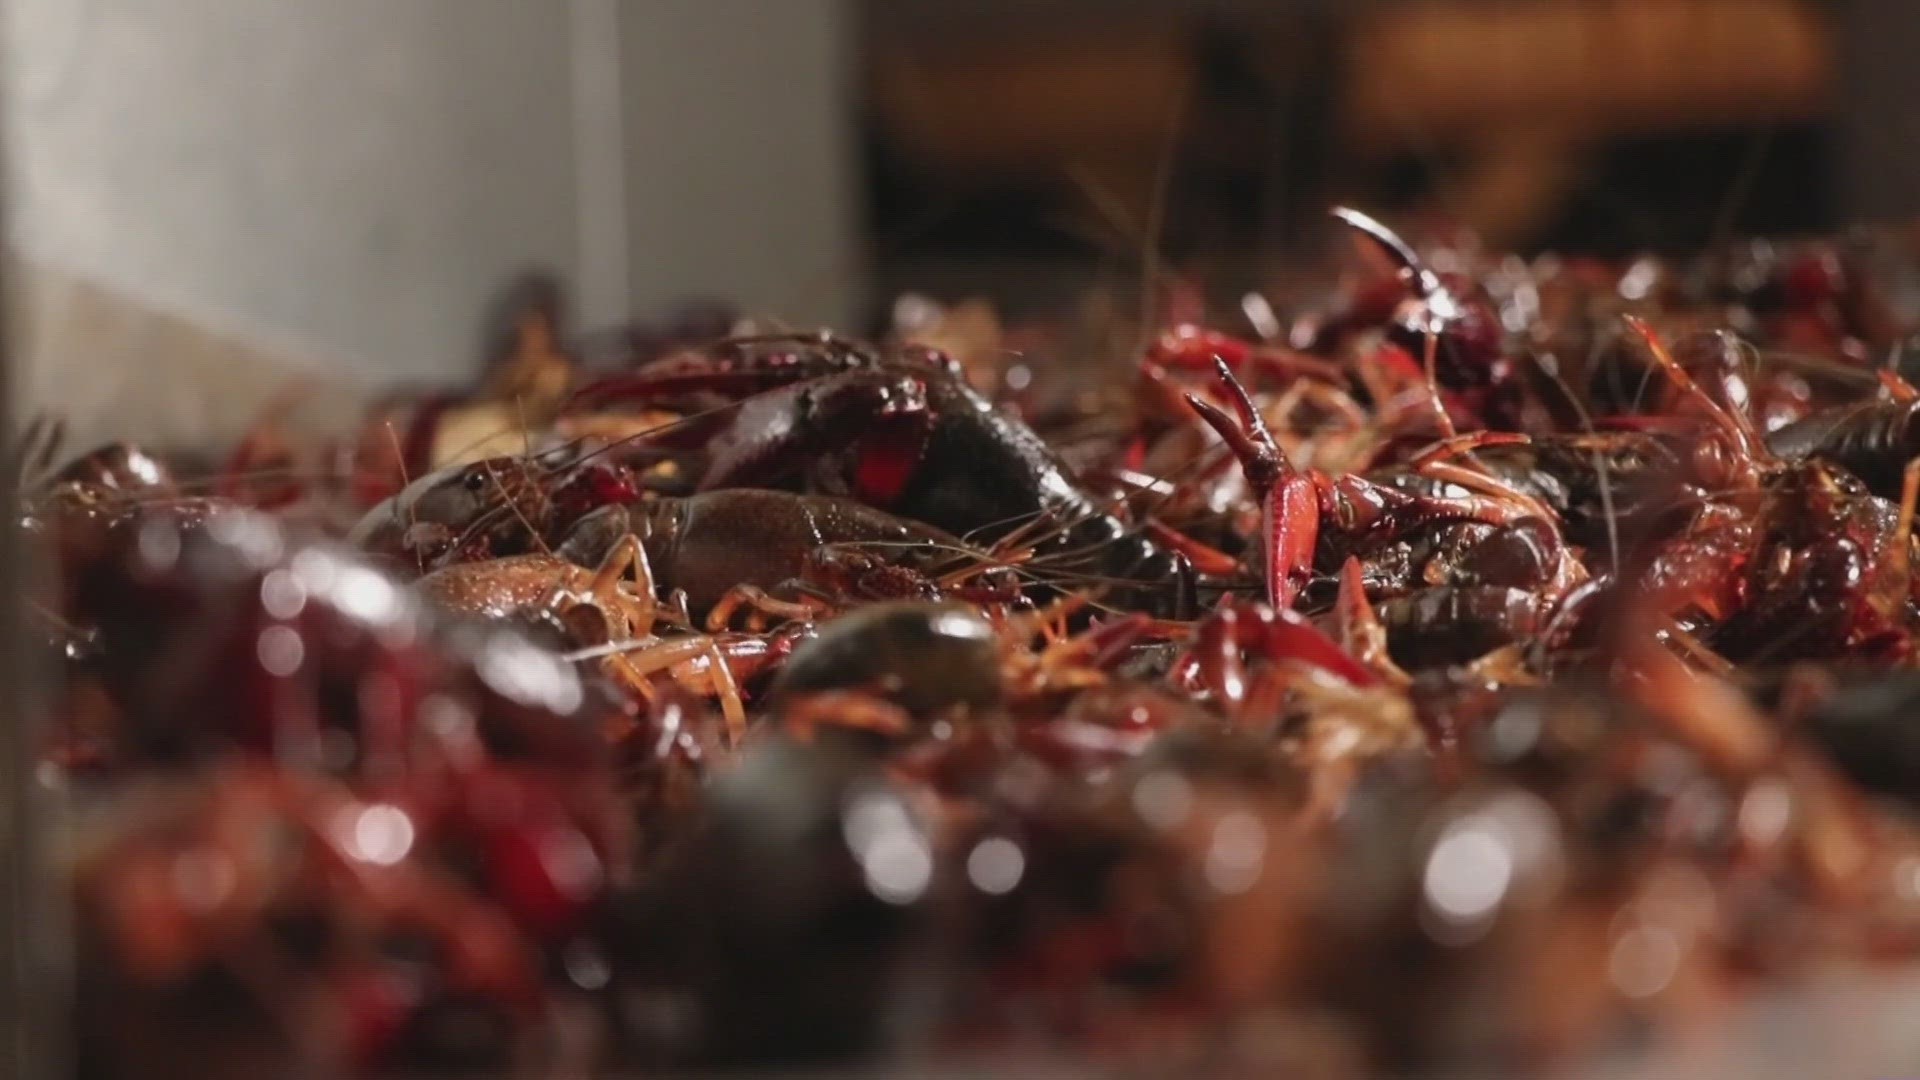 During a typical year, Louisiana generates anywhere from 175 million to 200 million pounds of crawfish — contributing $500 million to the state’s economy annually